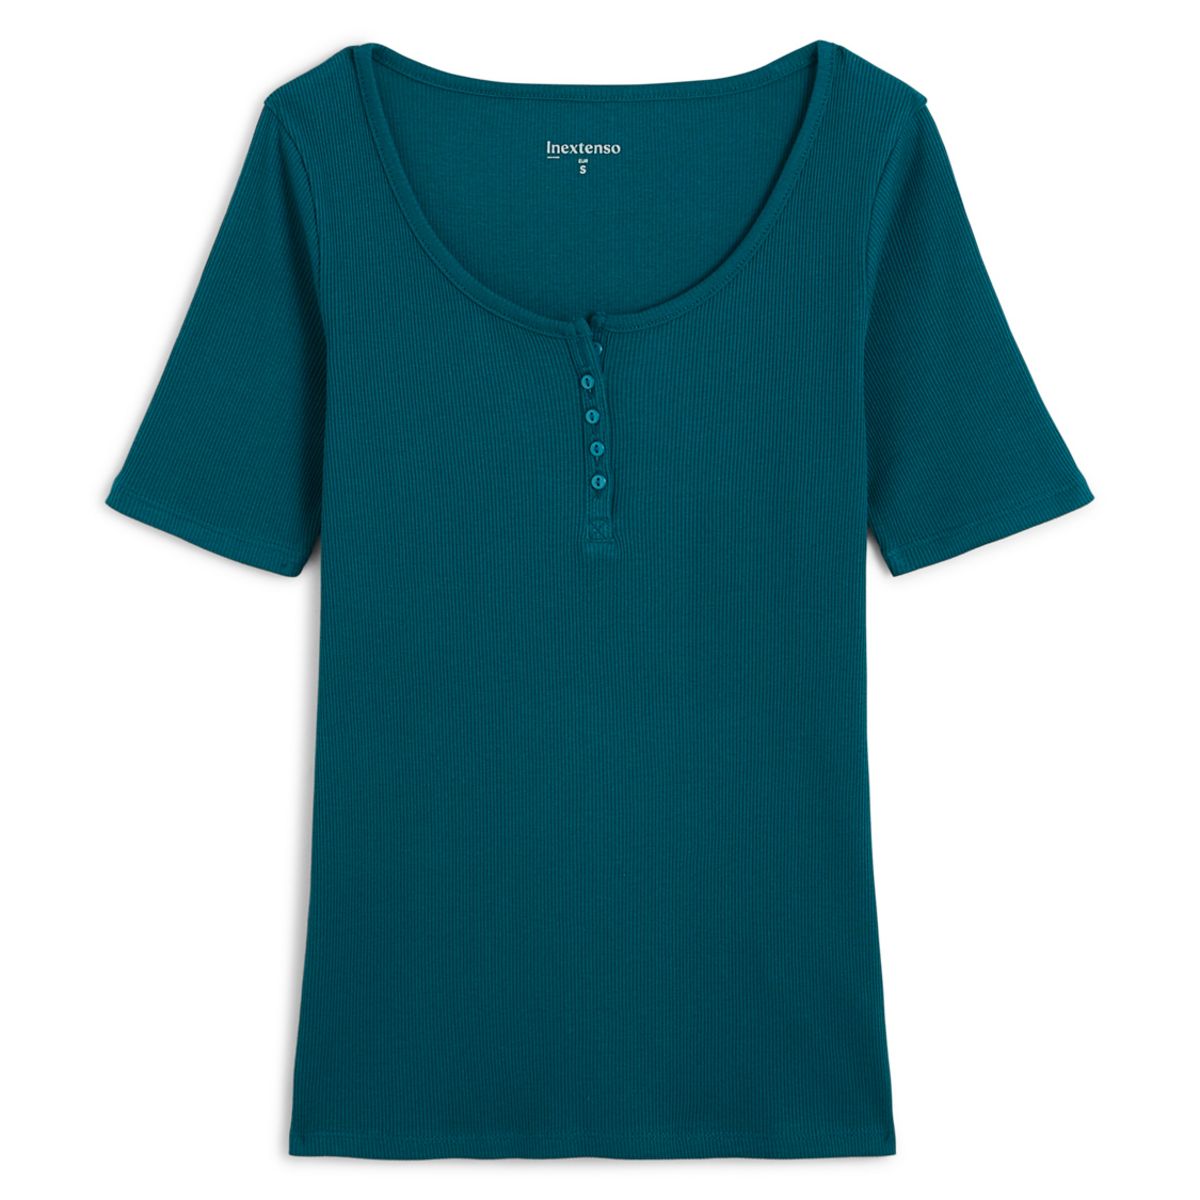 INEXTENSO T-shirt turquoise femme